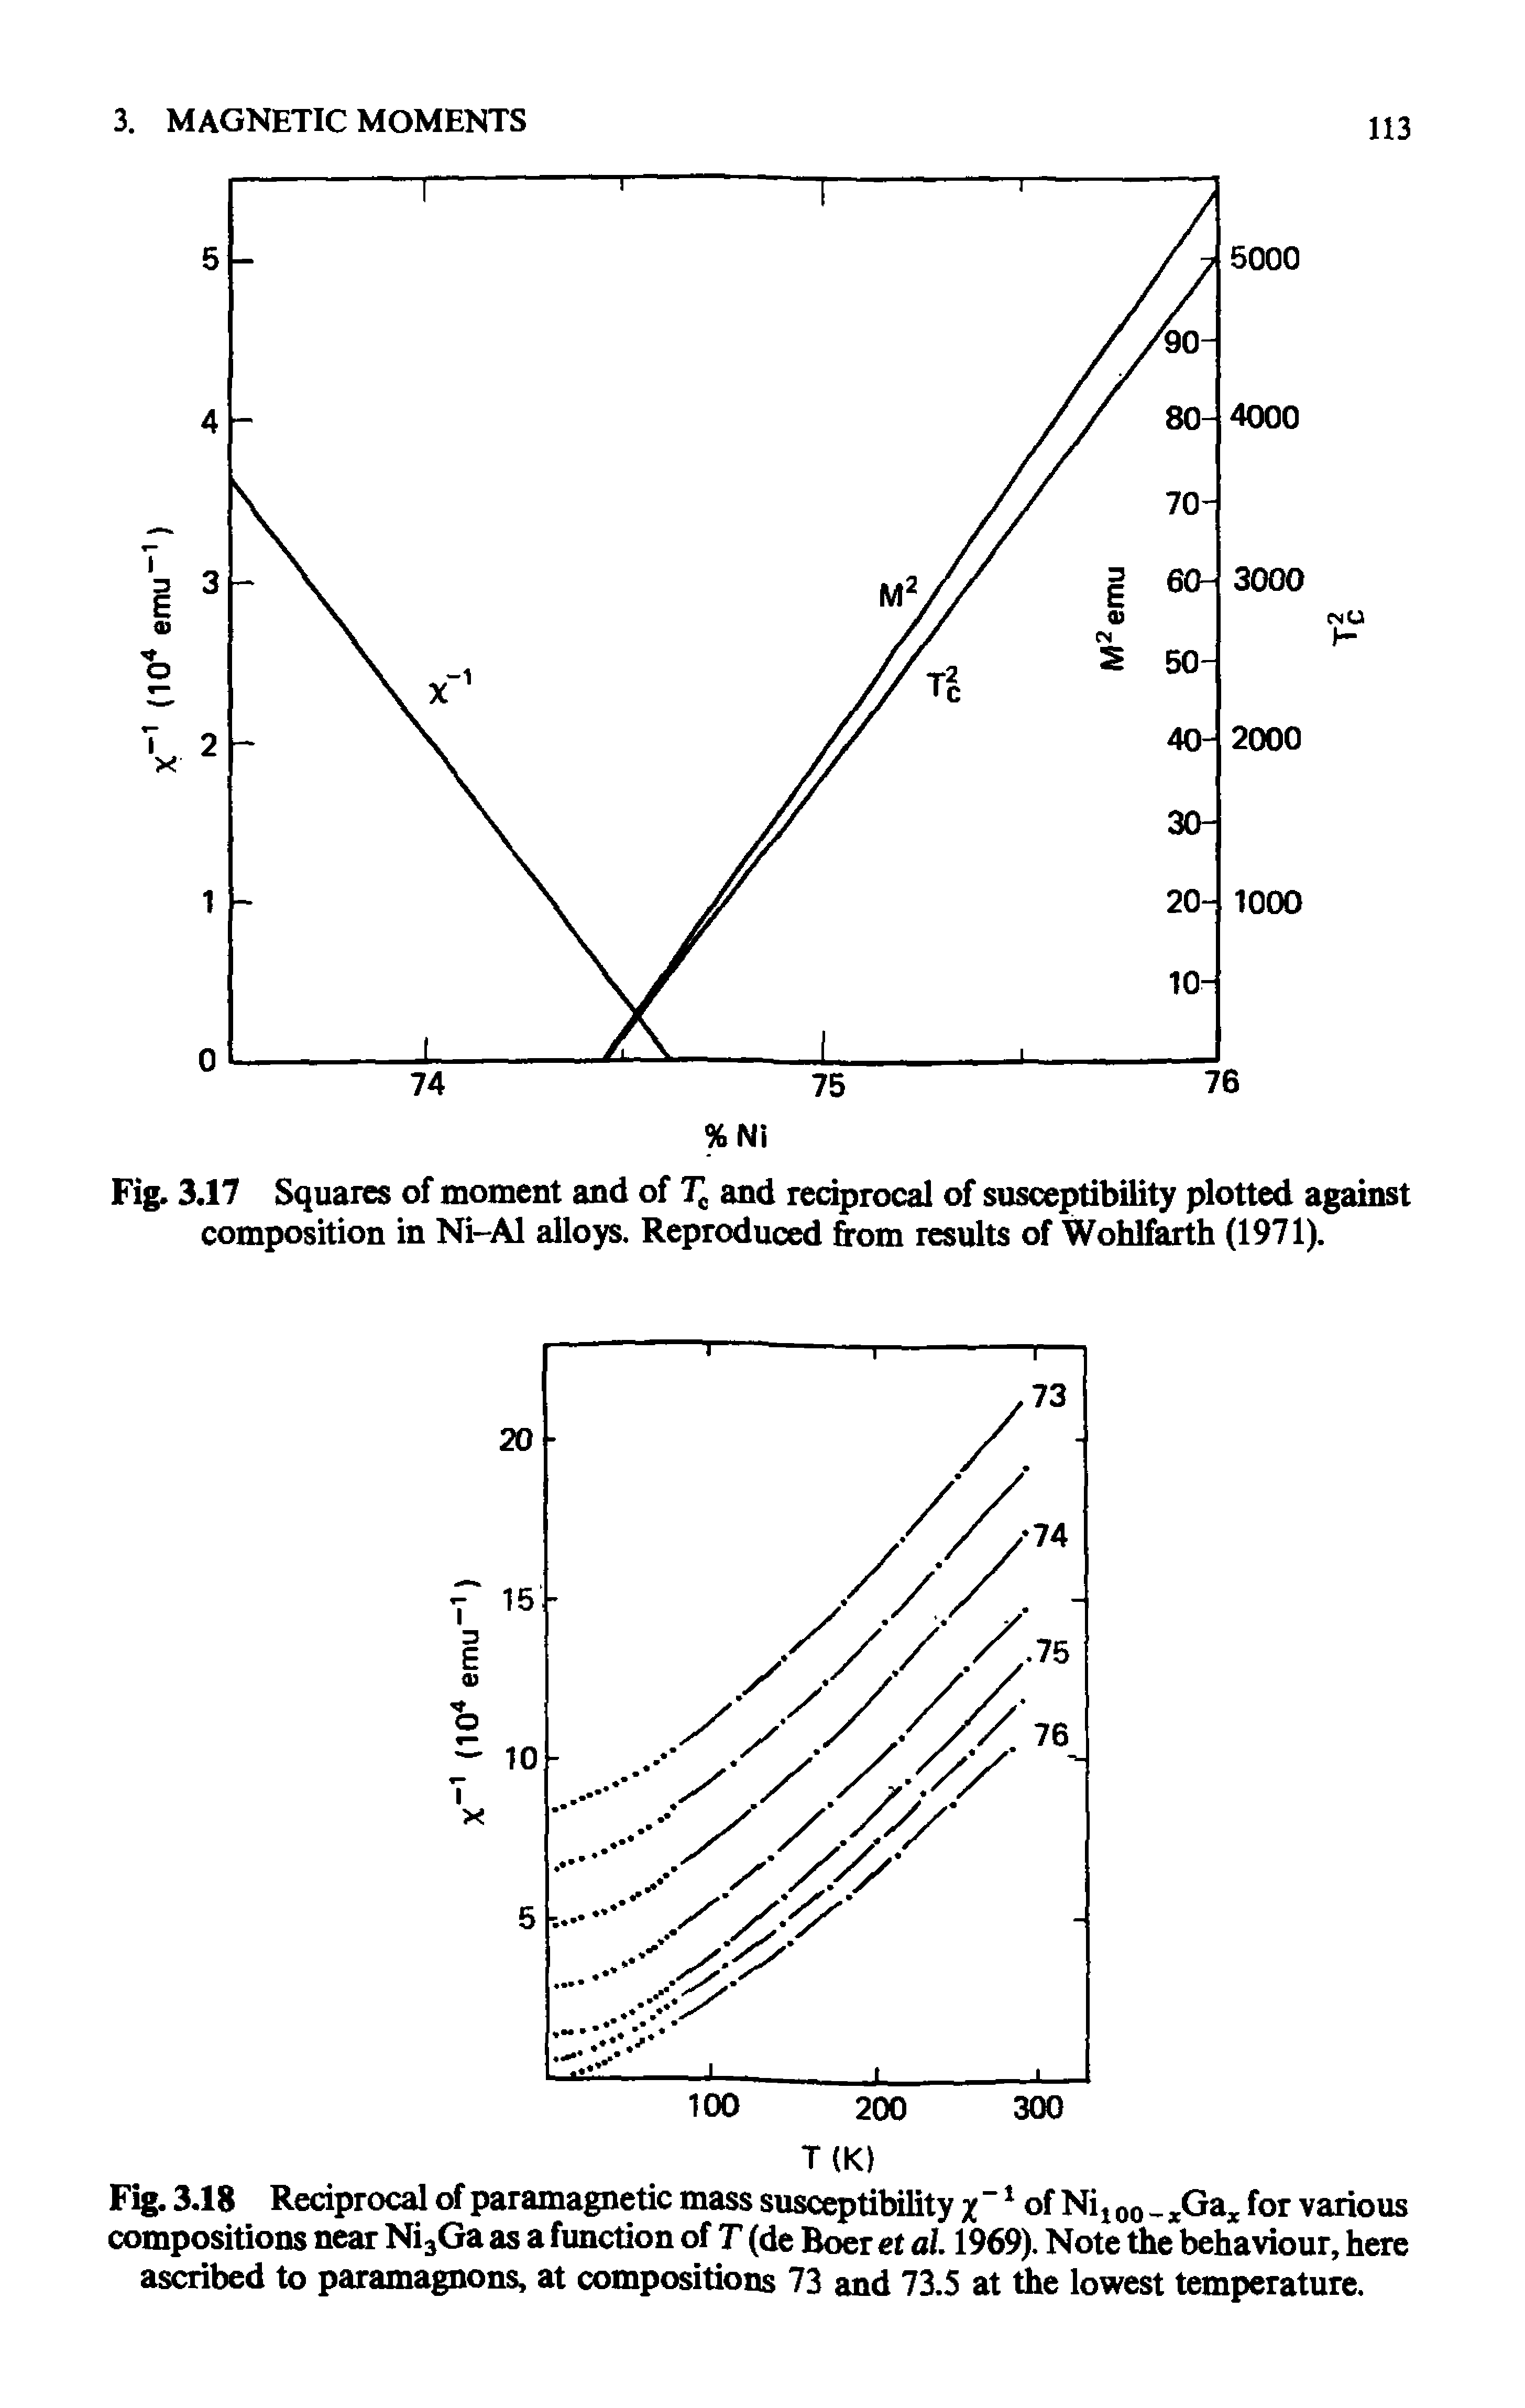 Fig. 3.18 Reciprocal of paramagnetic mass susceptibility x 1 of Ni 00 - Gax for various compositions near Ni3Ga as a function of T (de Boer et al 1969). Note the behaviour, here ascribed to paramagnons, at compositions 73 and 73.5 at the lowest temperature.